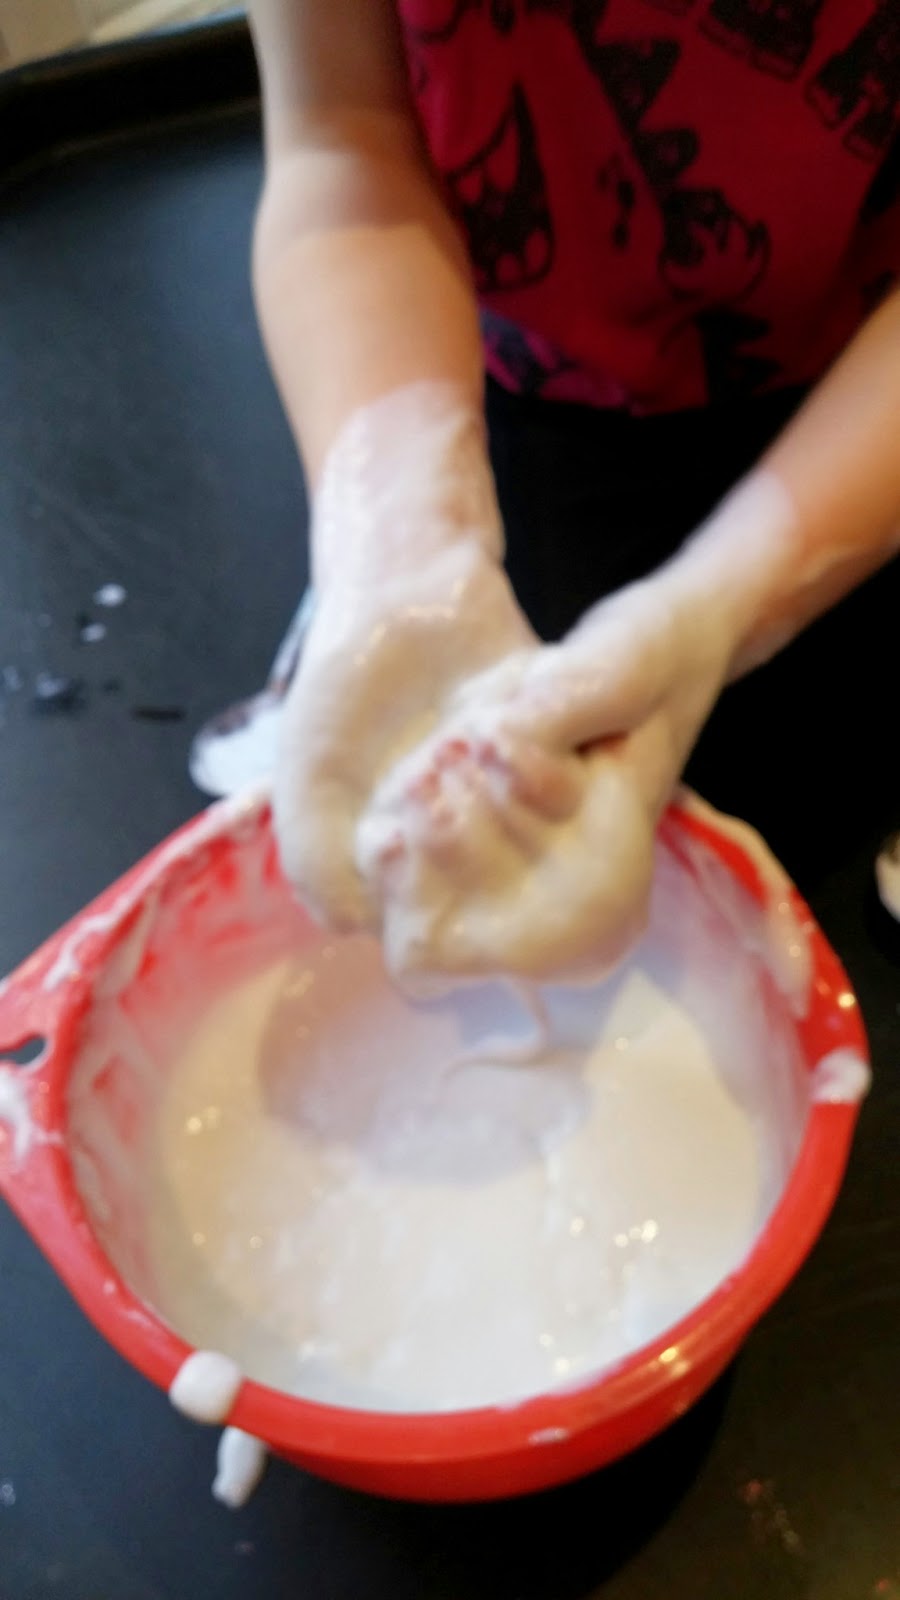 washing hands in slime